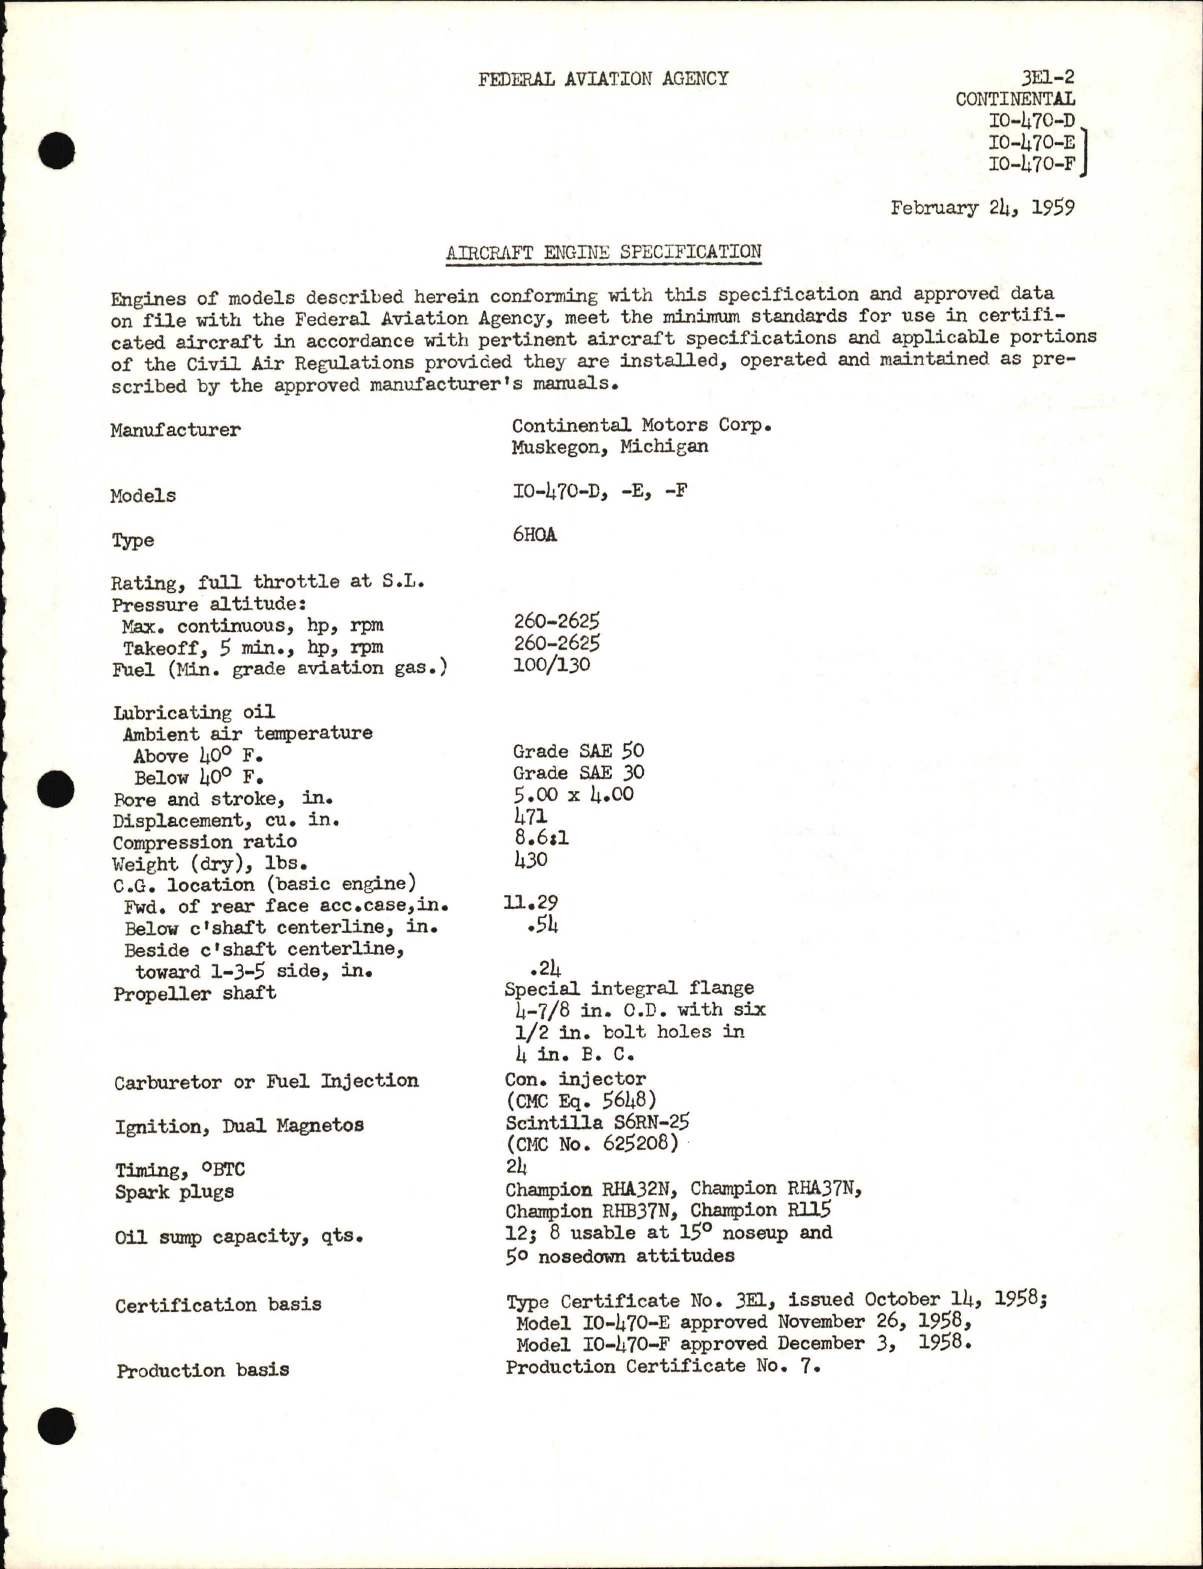 Sample page 1 from AirCorps Library document: IO-470-D, -E, and -F